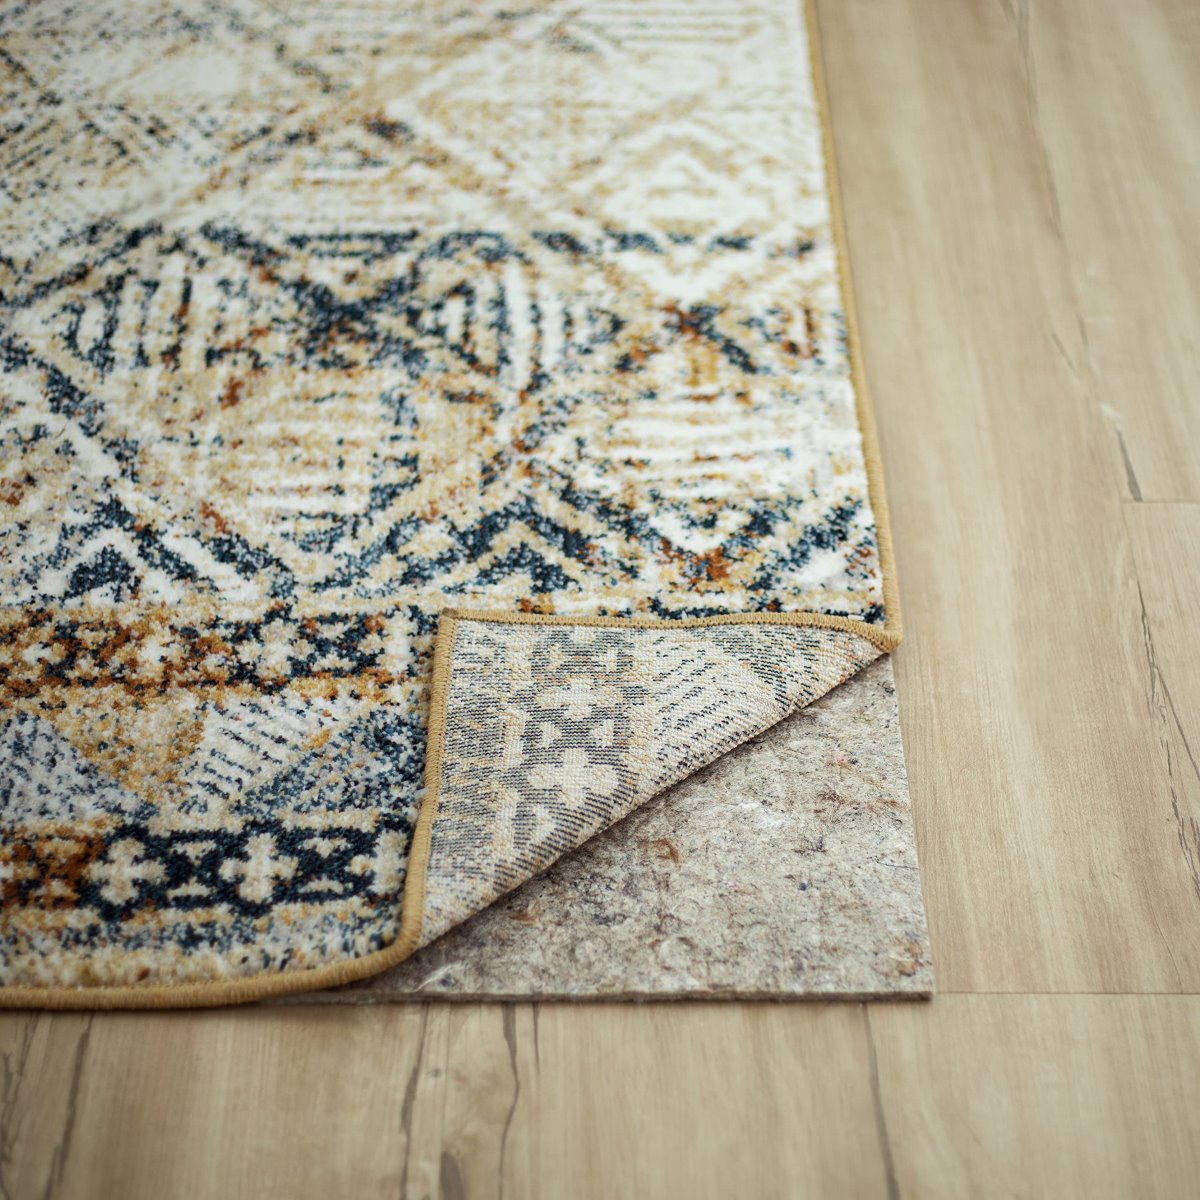 Which Rugs and Mats Won't Stain Vinyl Plank Flooring? » The Money Pit